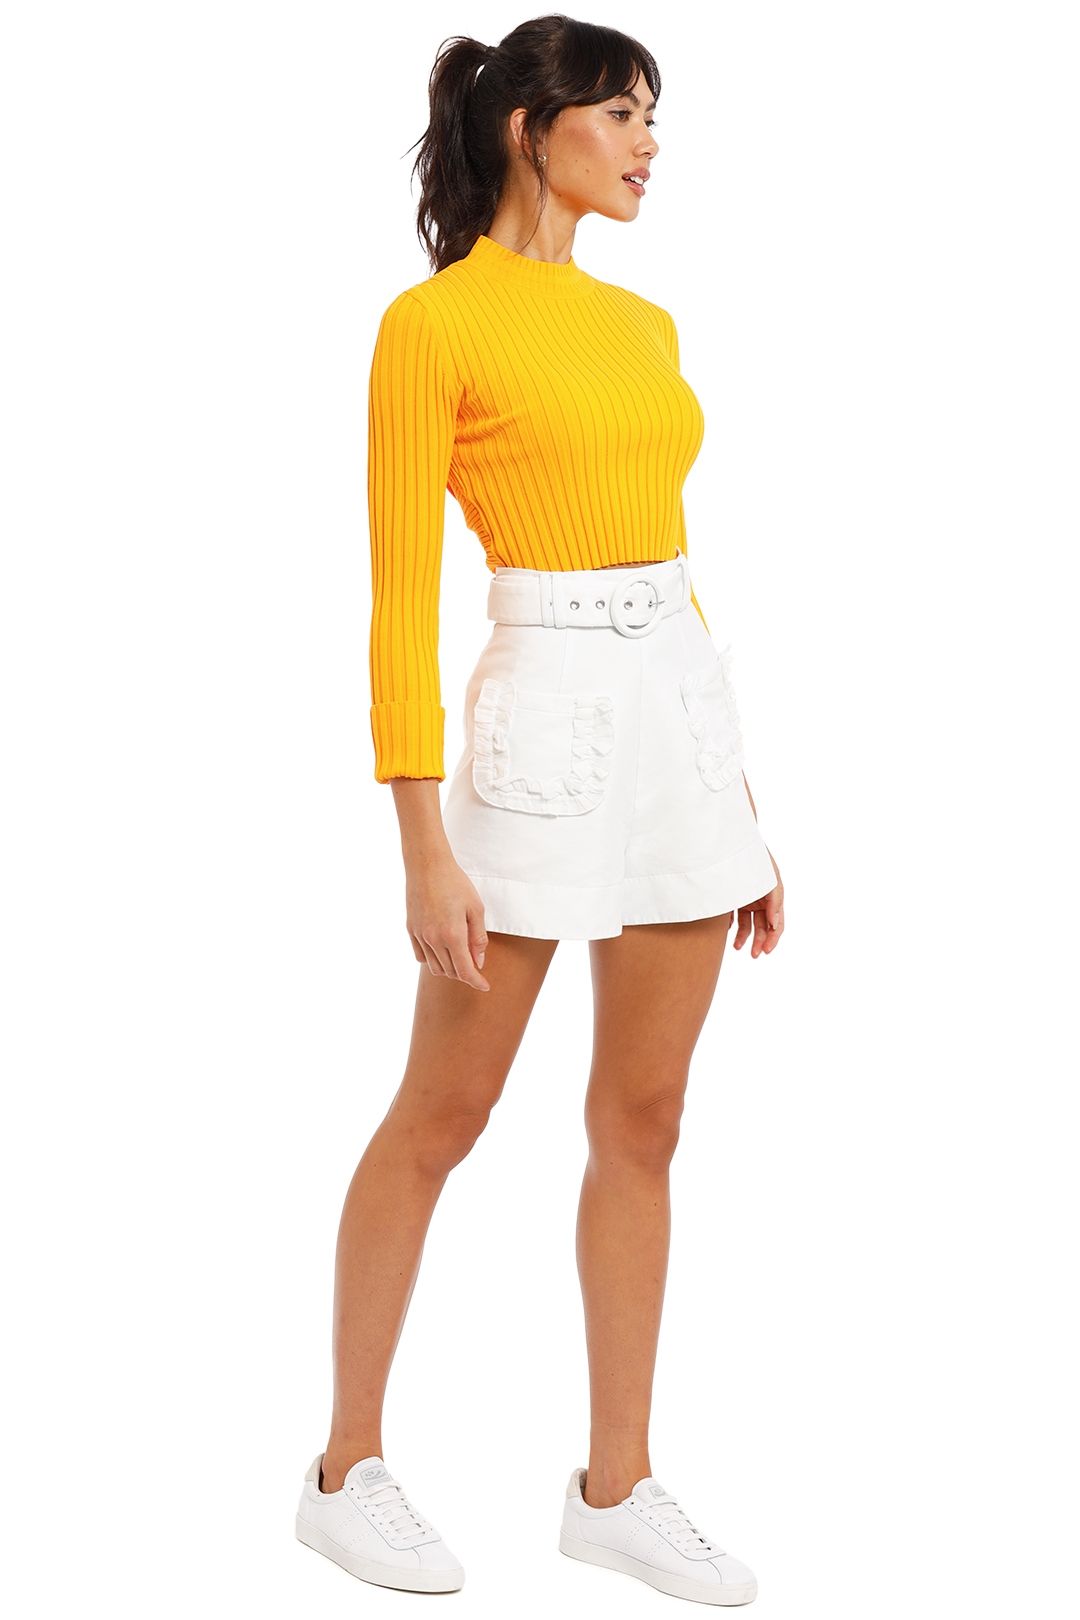 AJE Edner Cropped Knit Top cutout